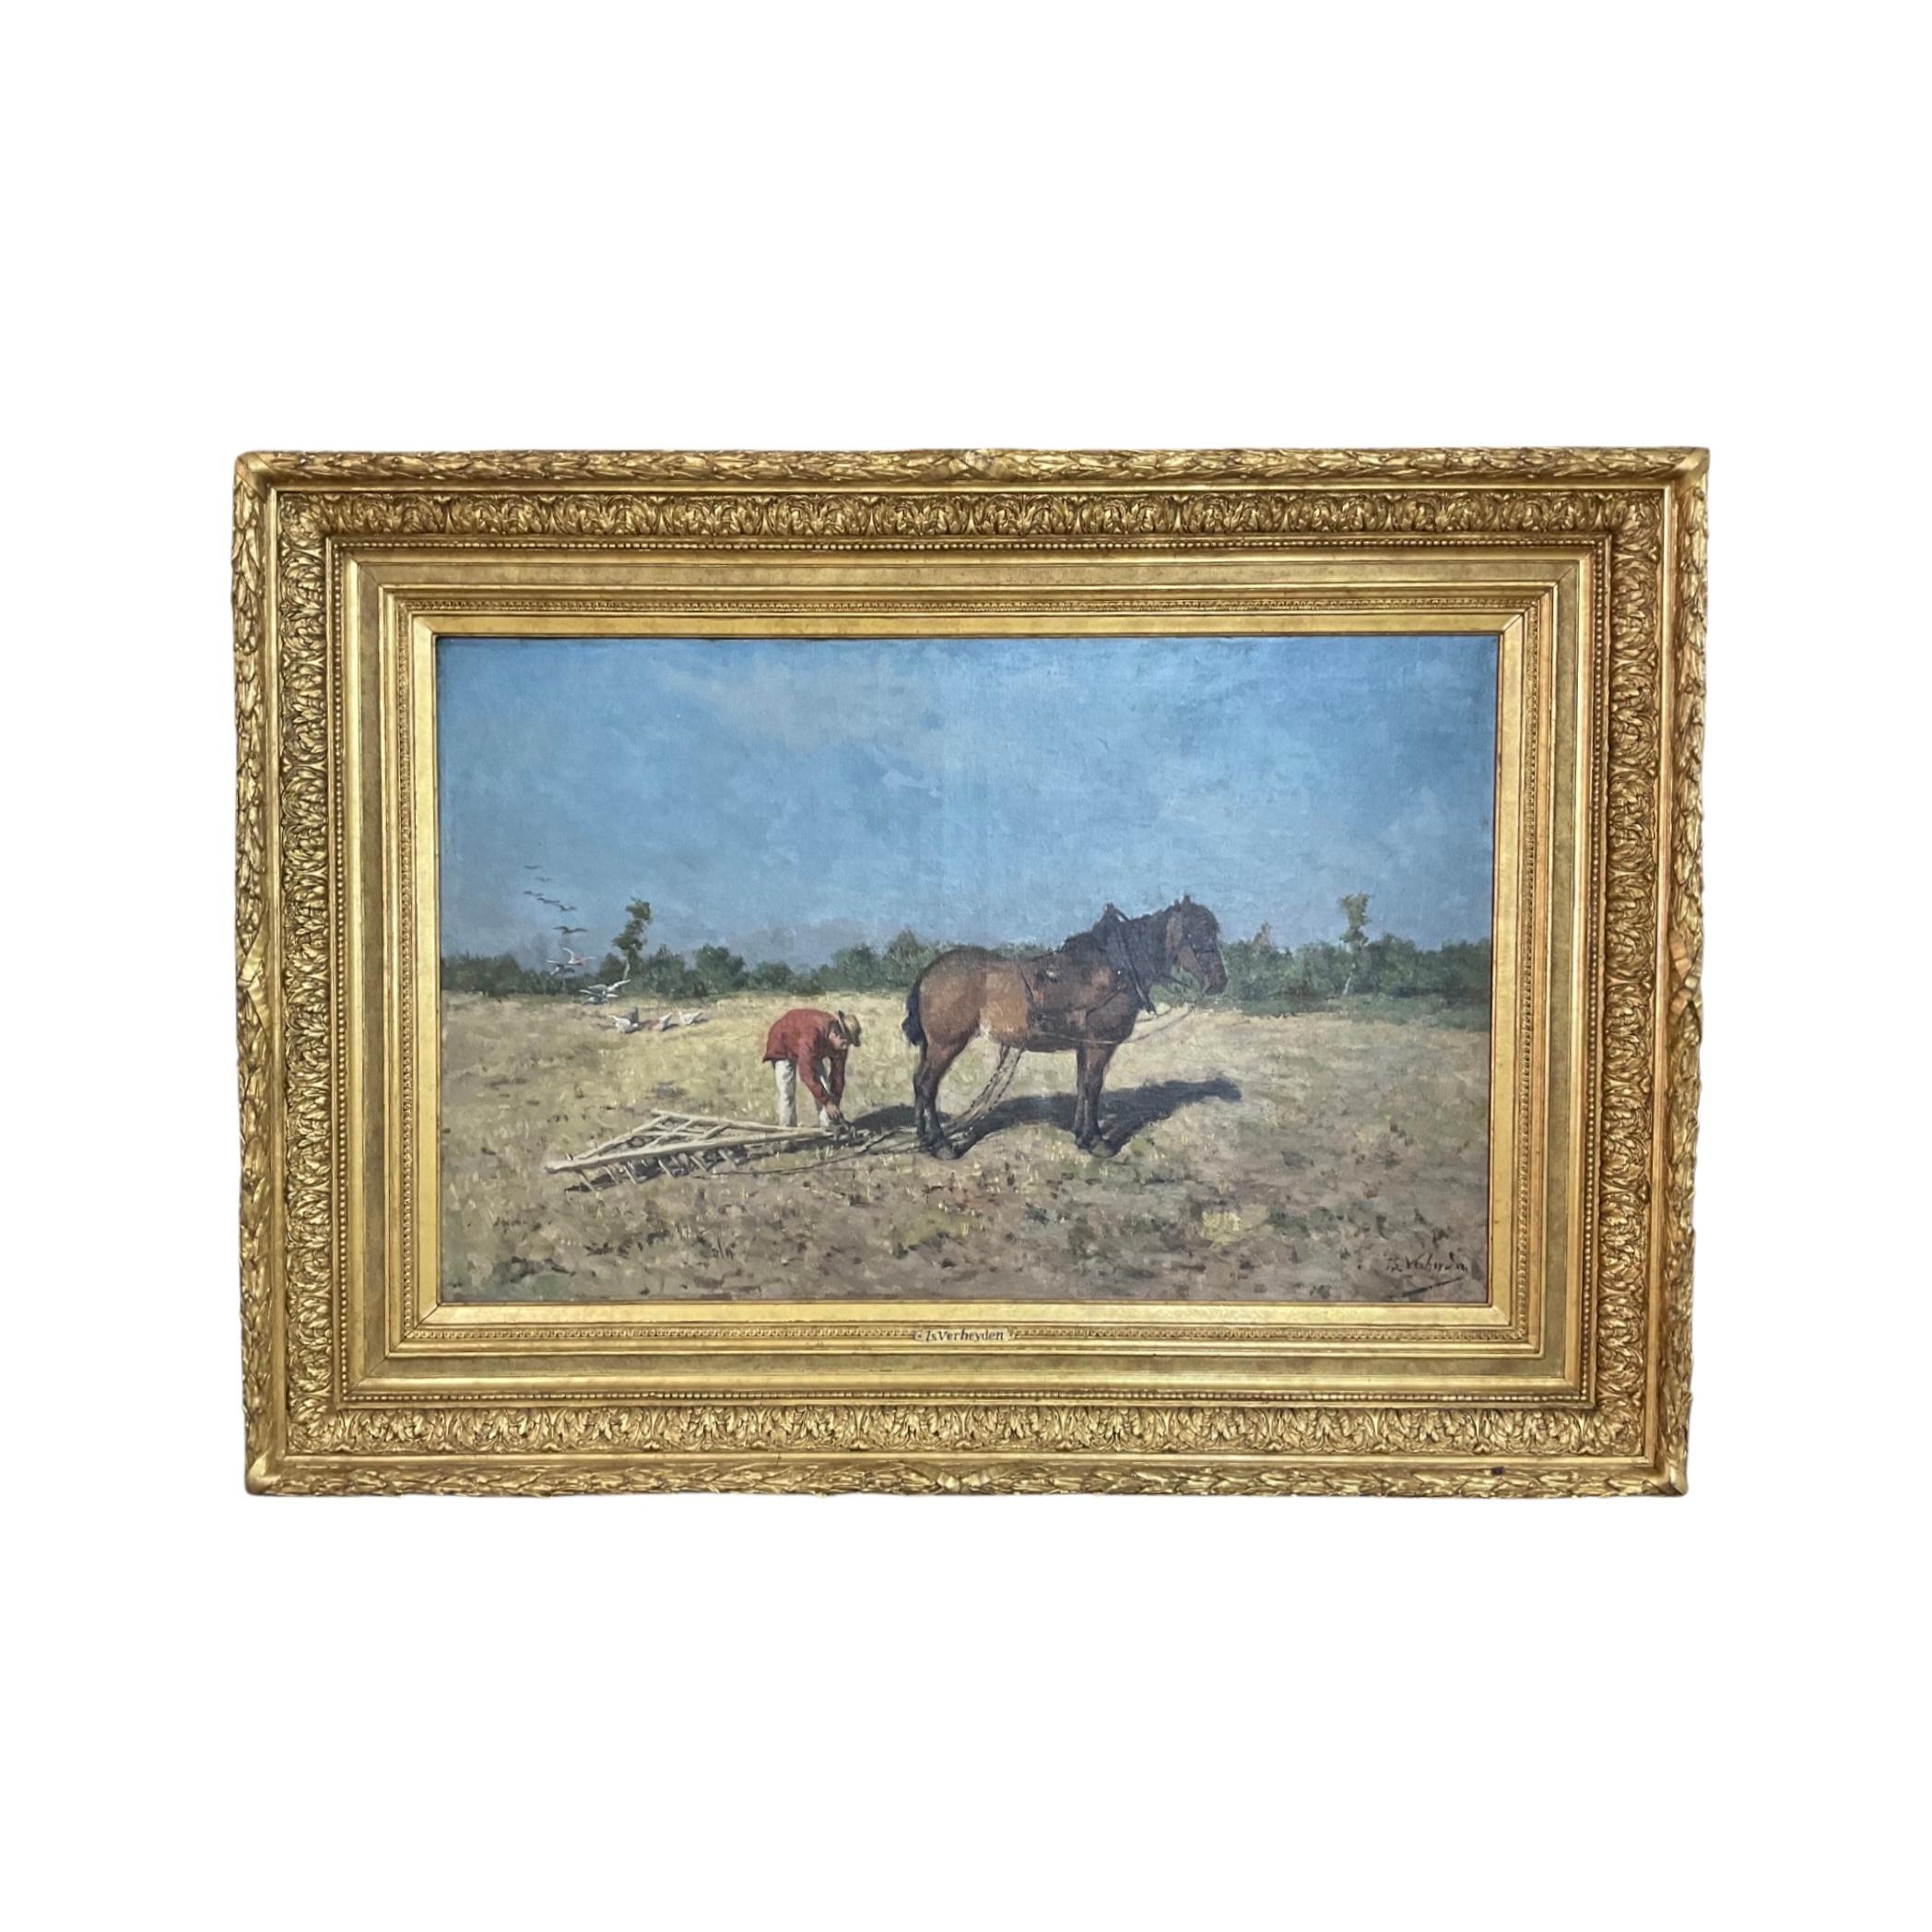 This 18th century painting, signed by L.S. VERHEYDER, showcases a scene of a man and a horse in a field, framed in a luxurious gold leaf frame with detailed hand carved details. Ideal for collectors and art enthusiasts alike, this piece will make a